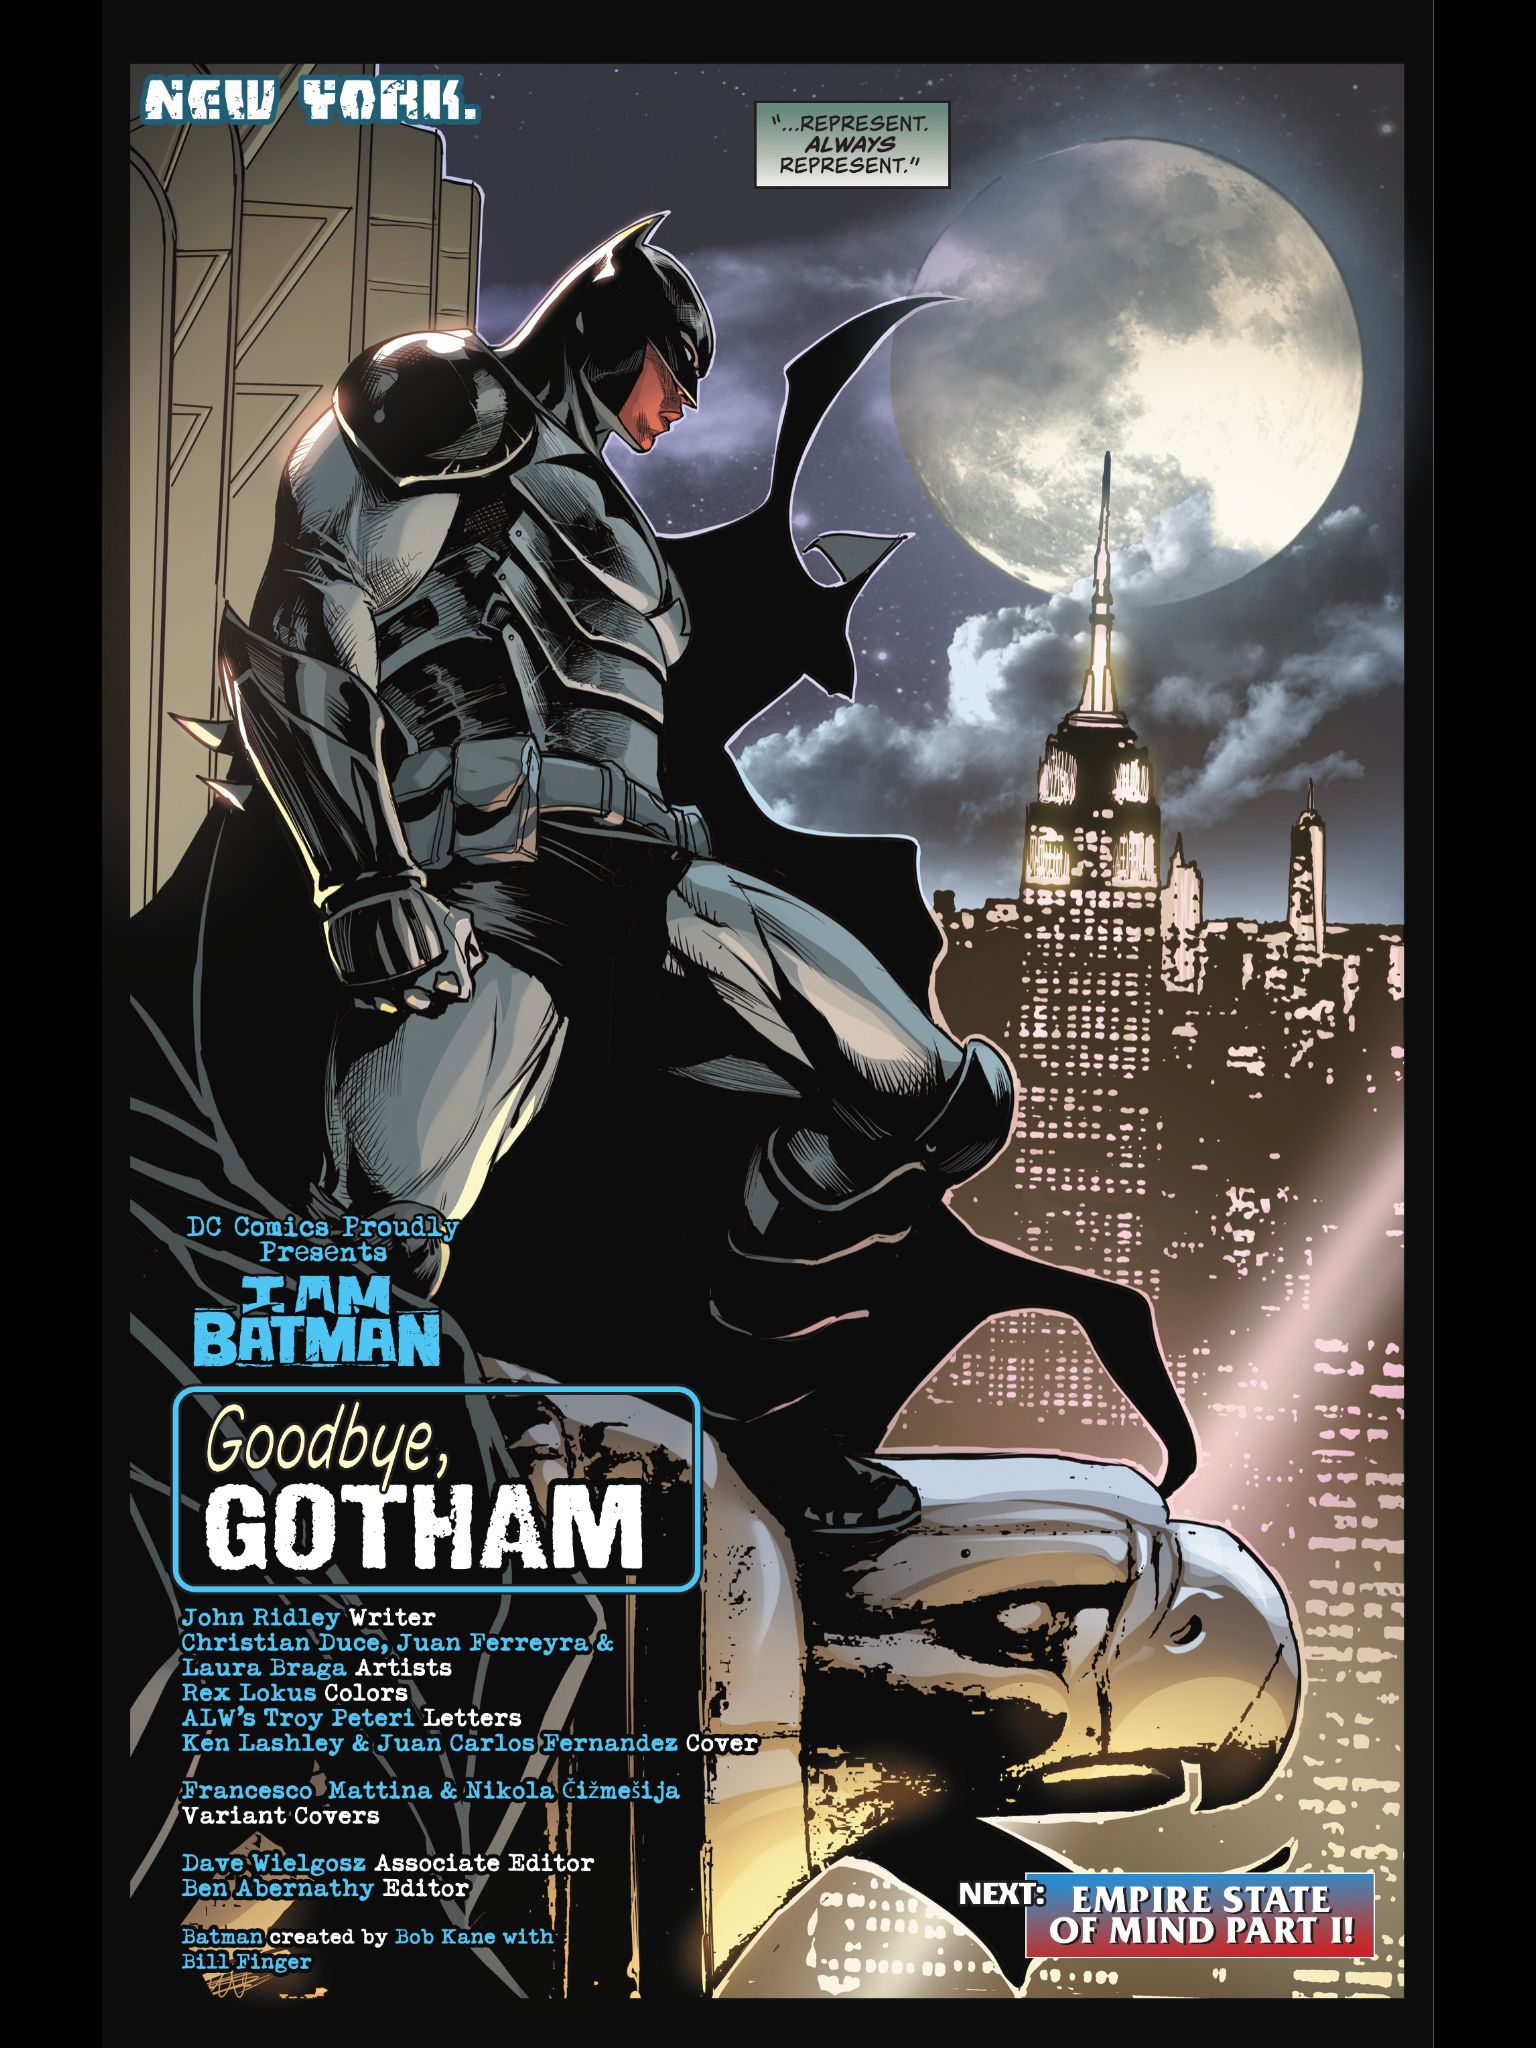 Jace Fox ditches his faceplate as the new Batman of New York City